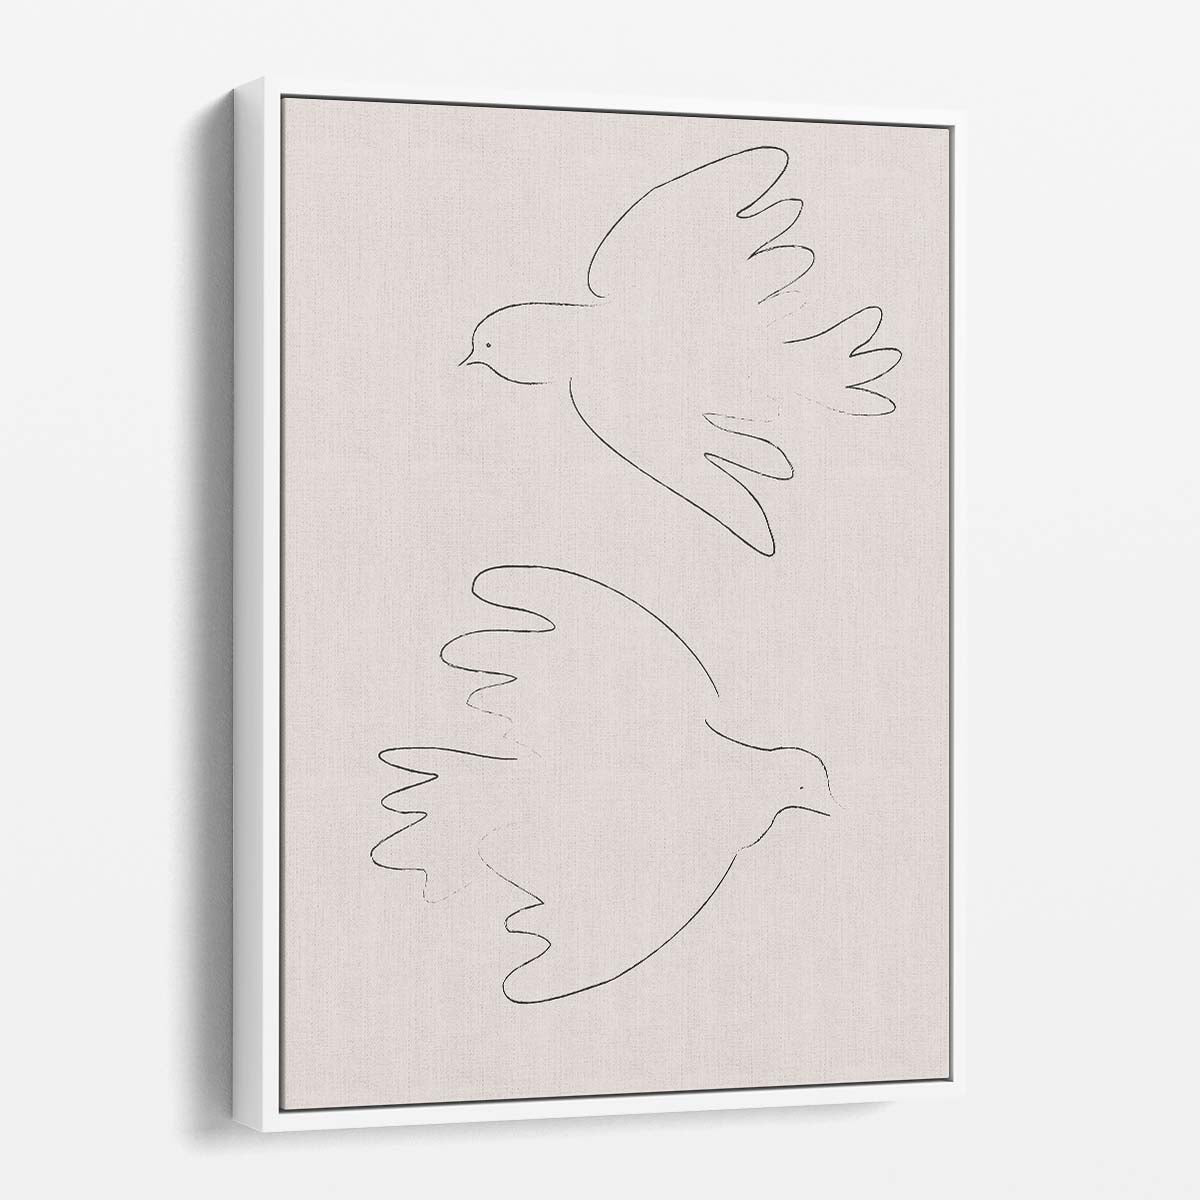 Minimalist Beige Dove Illustration, Boho Line Art Drawing by Luxuriance Designs, made in USA